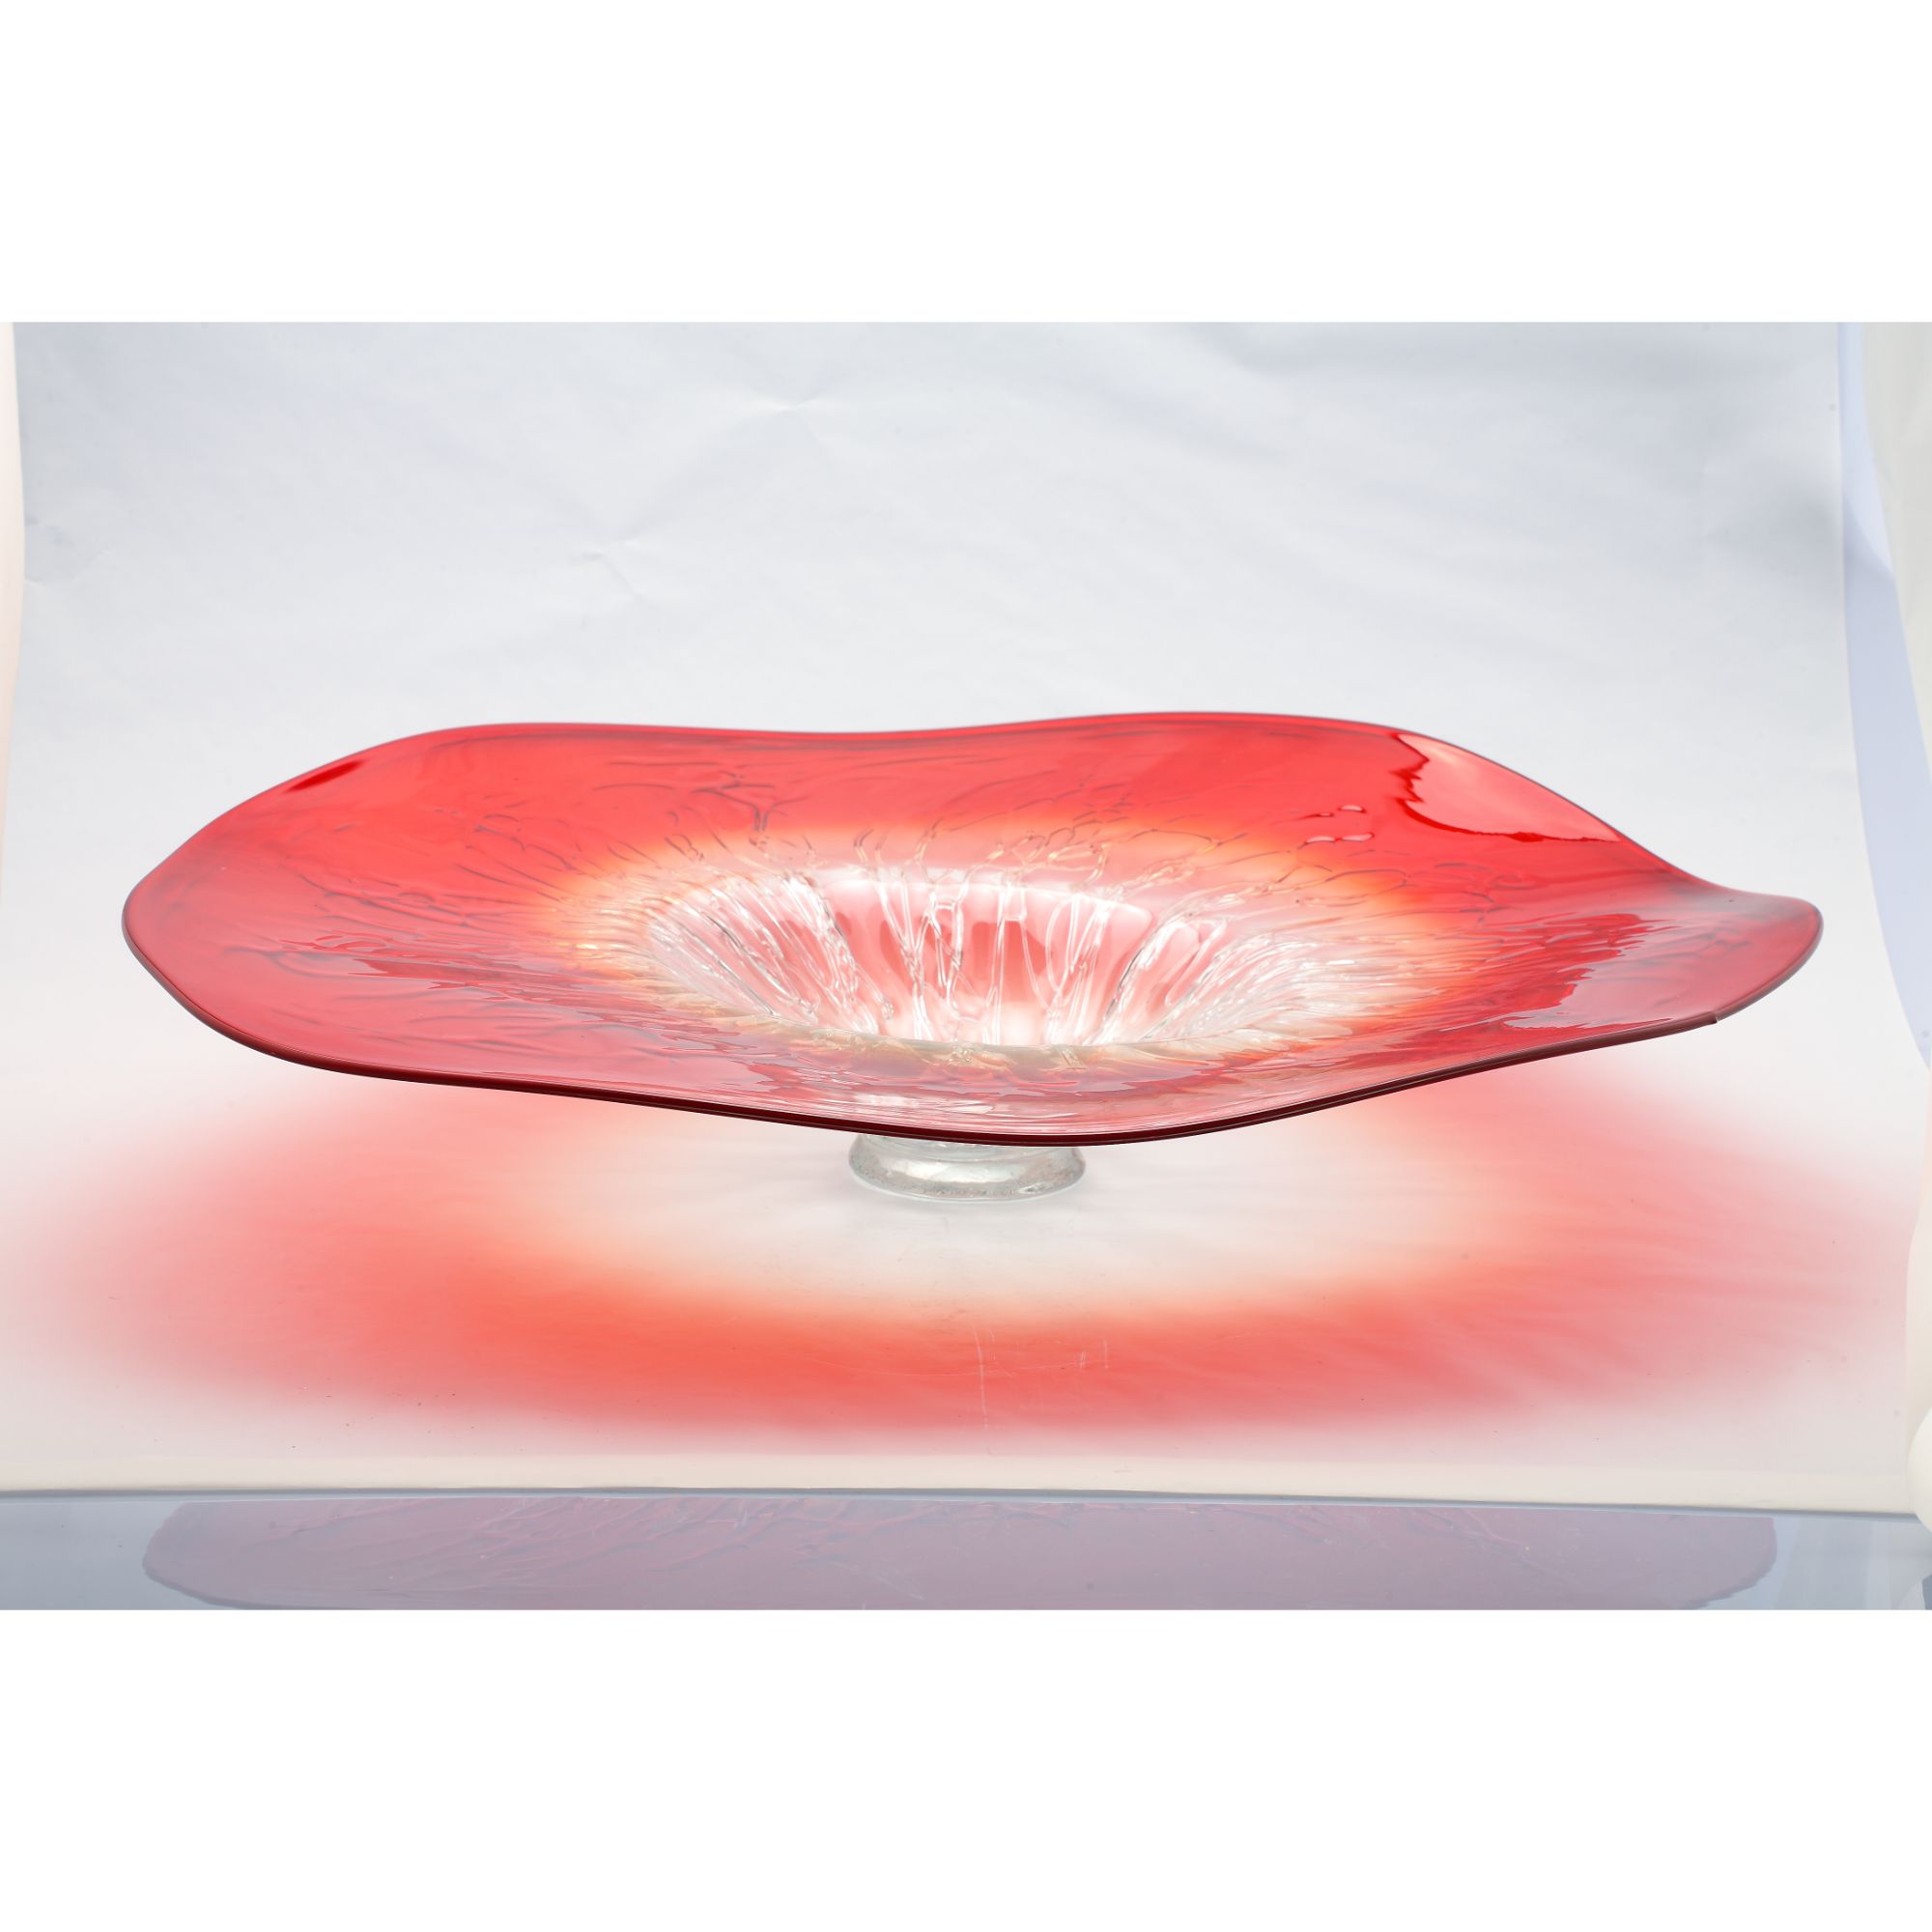 CC Home Furnishings 25.5" Vibrant Red and Orange Hand Blown Glass Plate